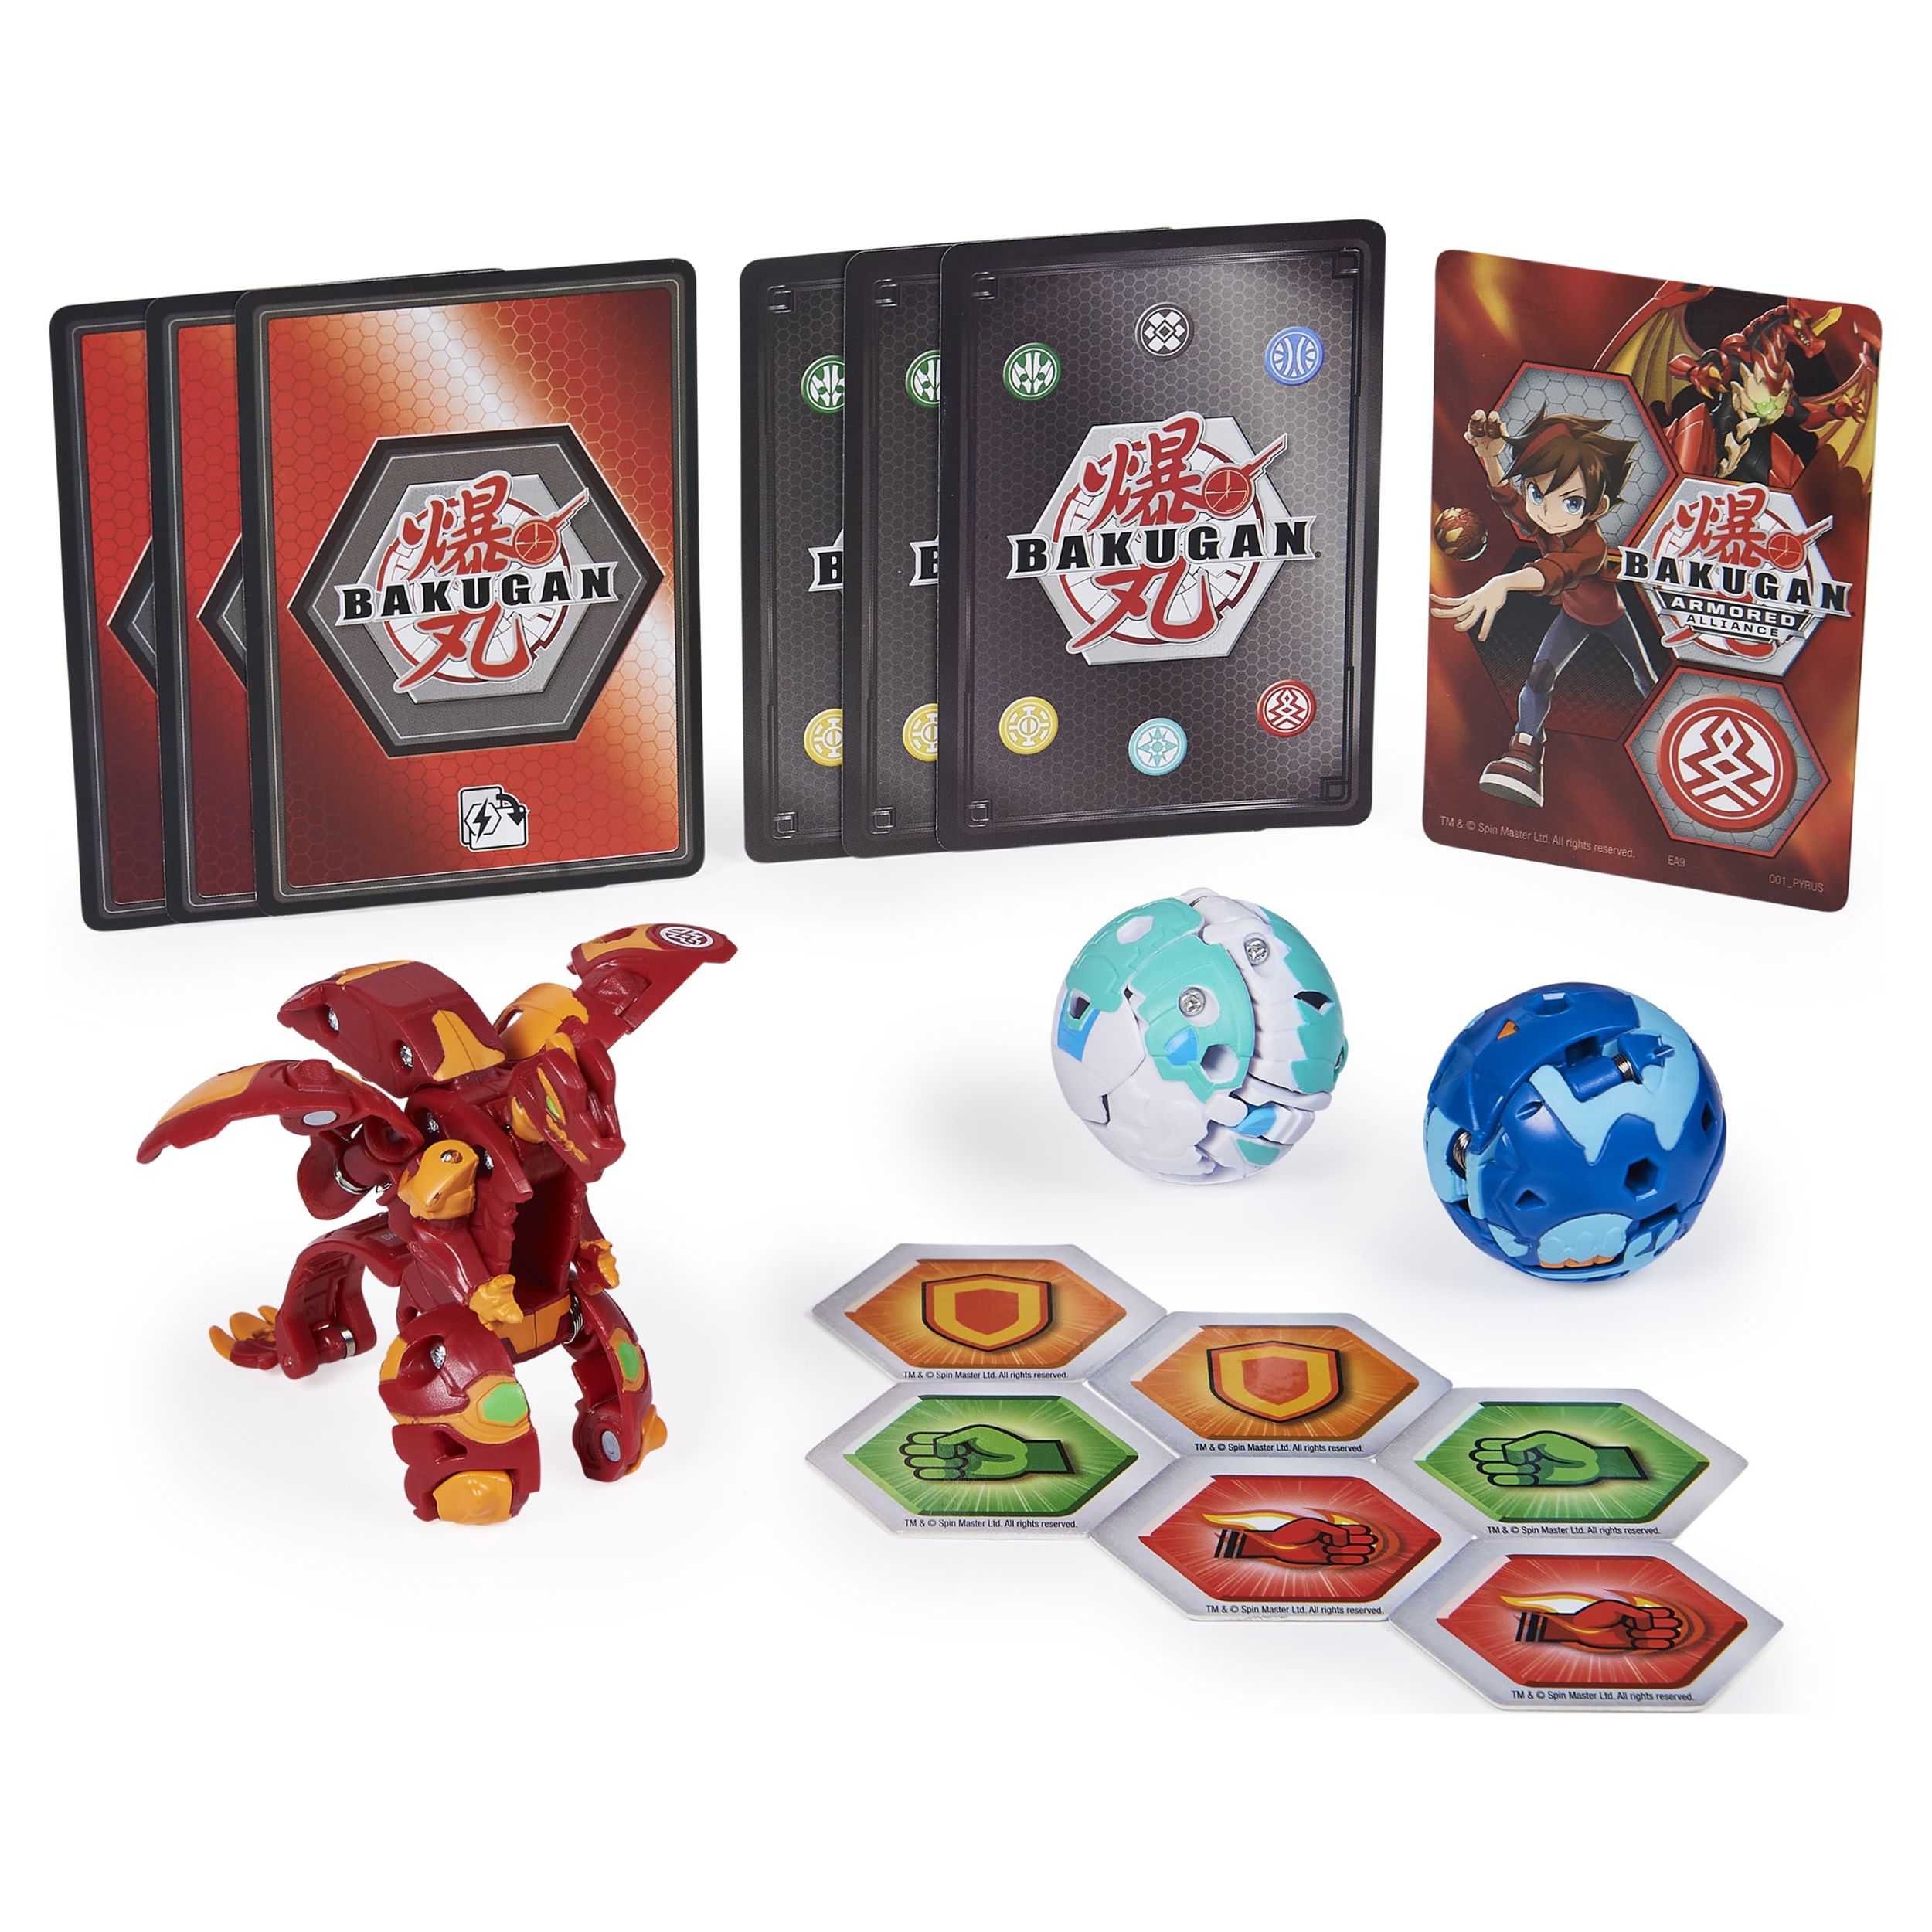 Bakugan Starter Pack 3-Pack, Dragonoid Ultra, Armored Alliance Collectible Action Figures - image 2 of 5